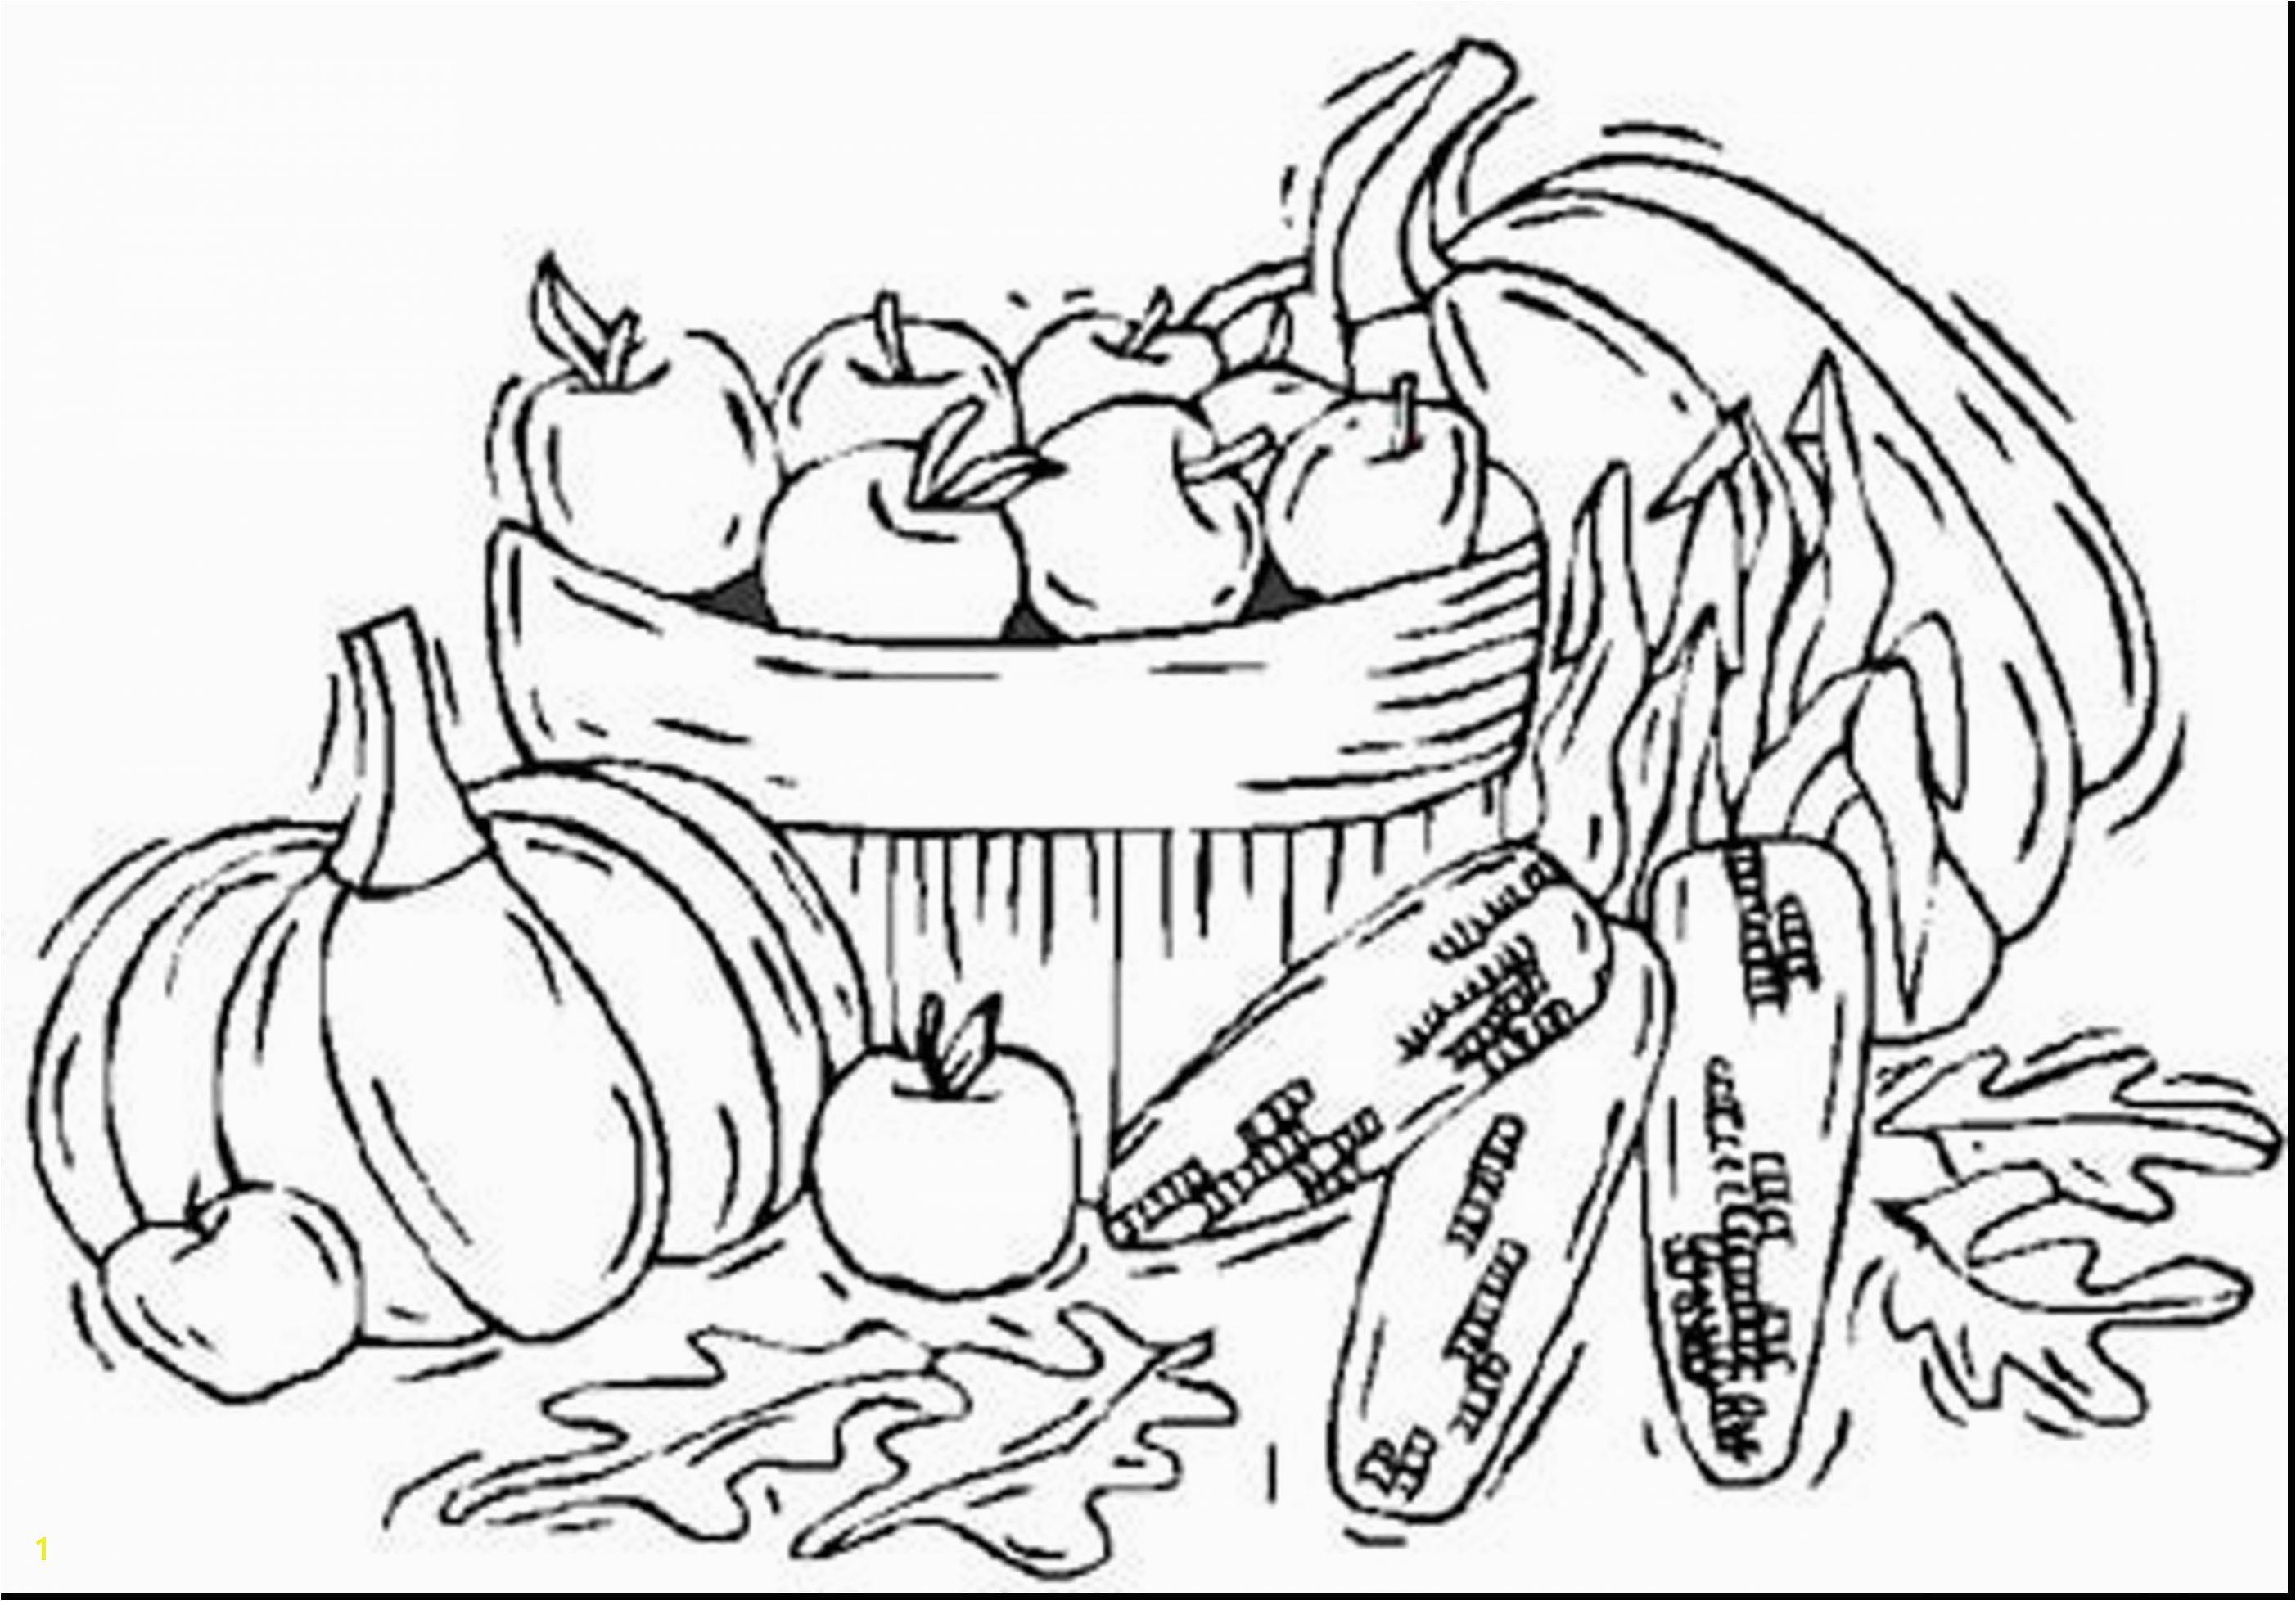 Odysseus Coloring Pages 14 Luxury Odysseus Coloring Pages Collection